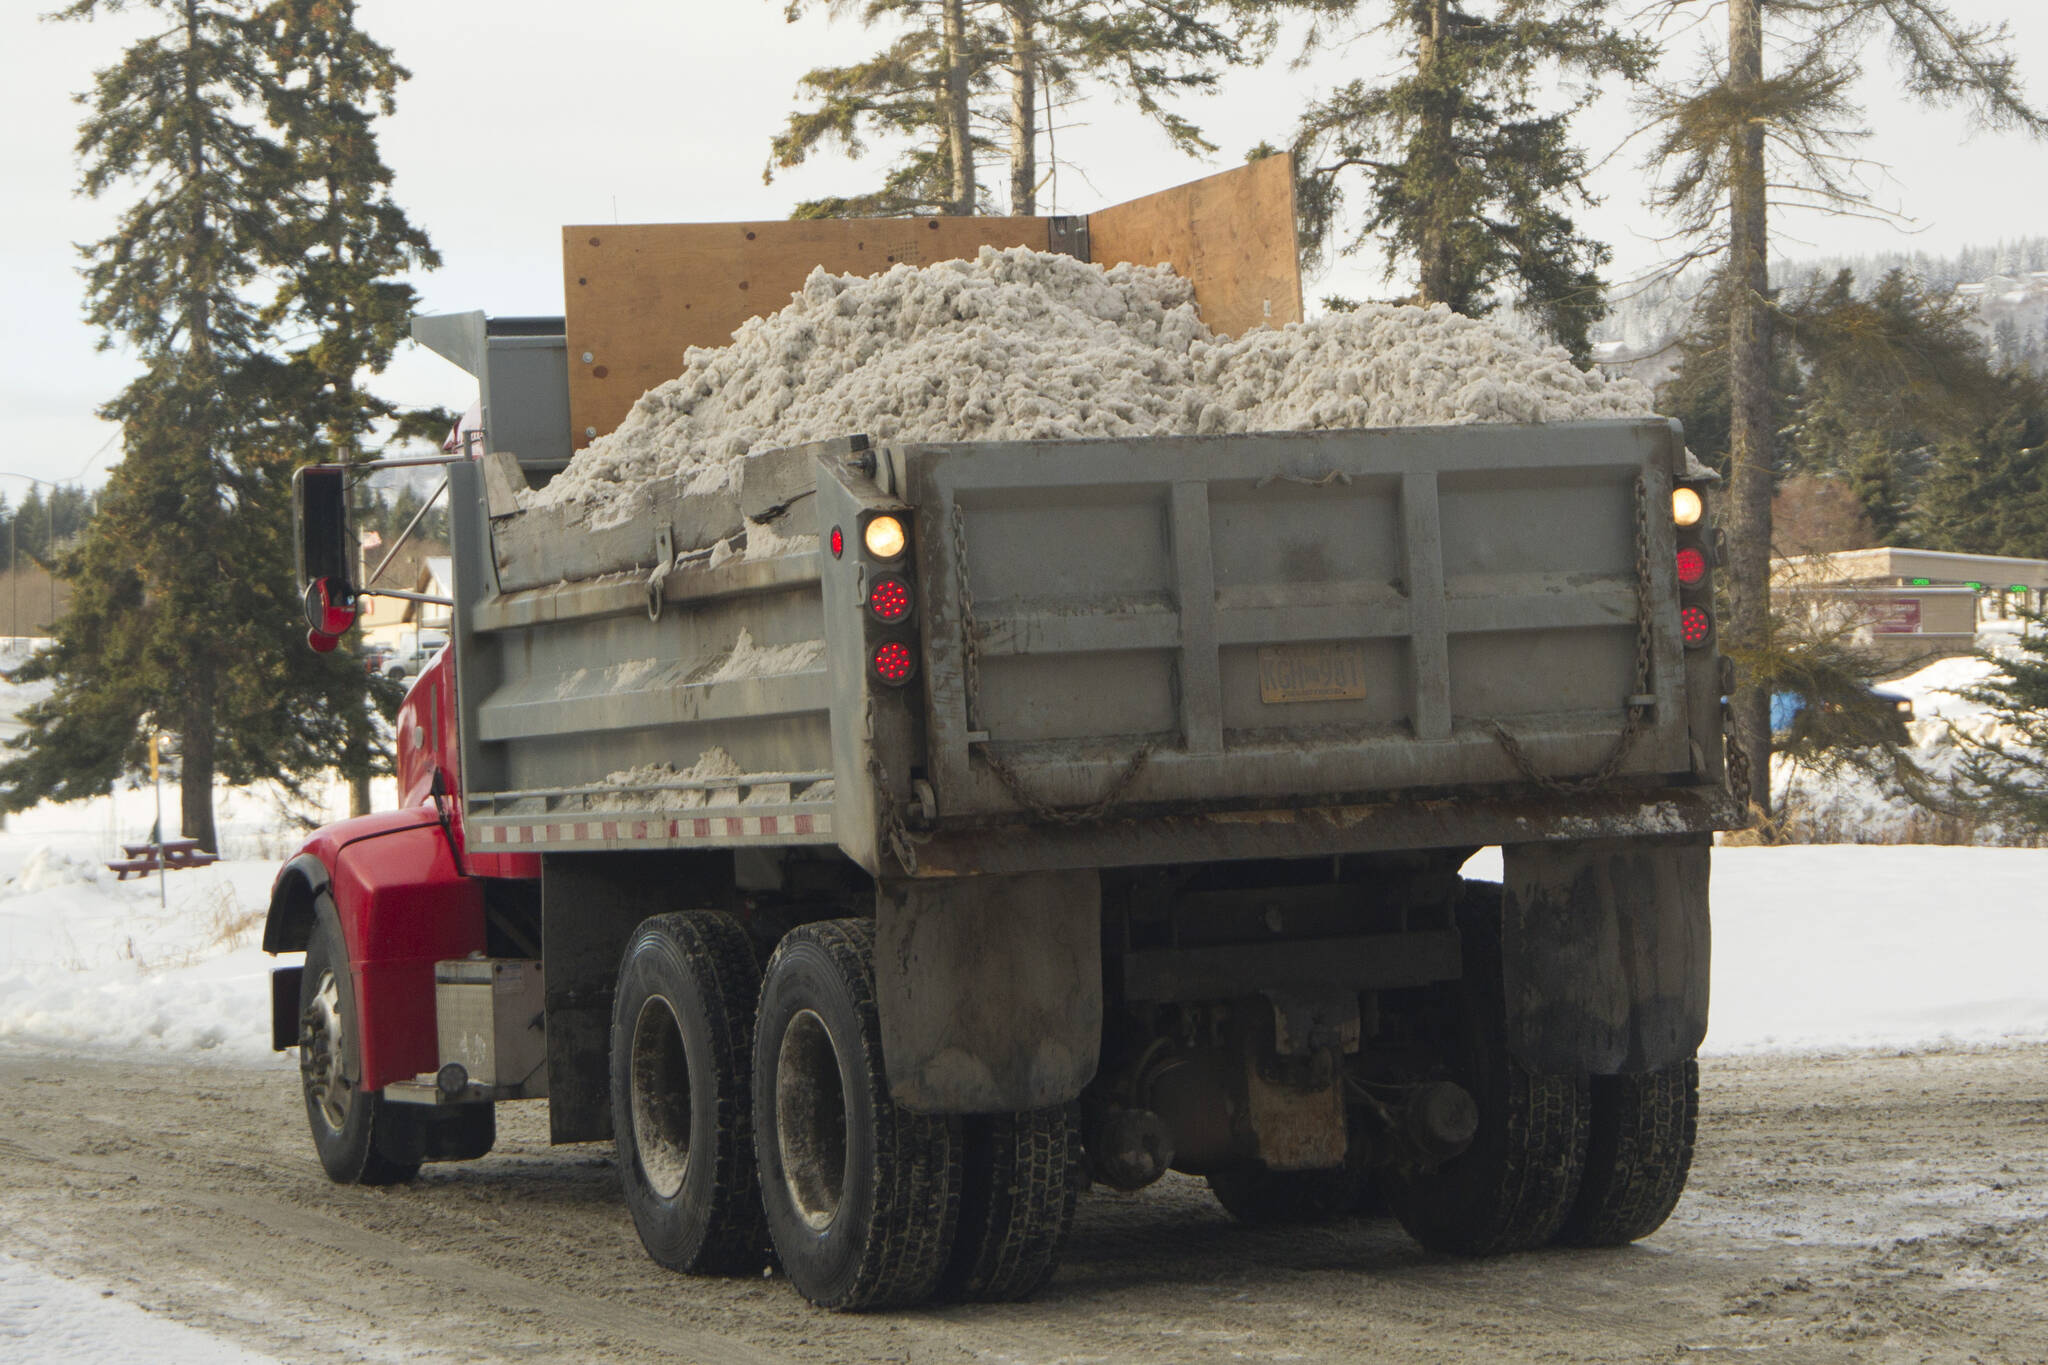 A truck filled with snow recently plowed from local roads backs up to dump the snow. (Photo by Sarah Knapp/Homer News)